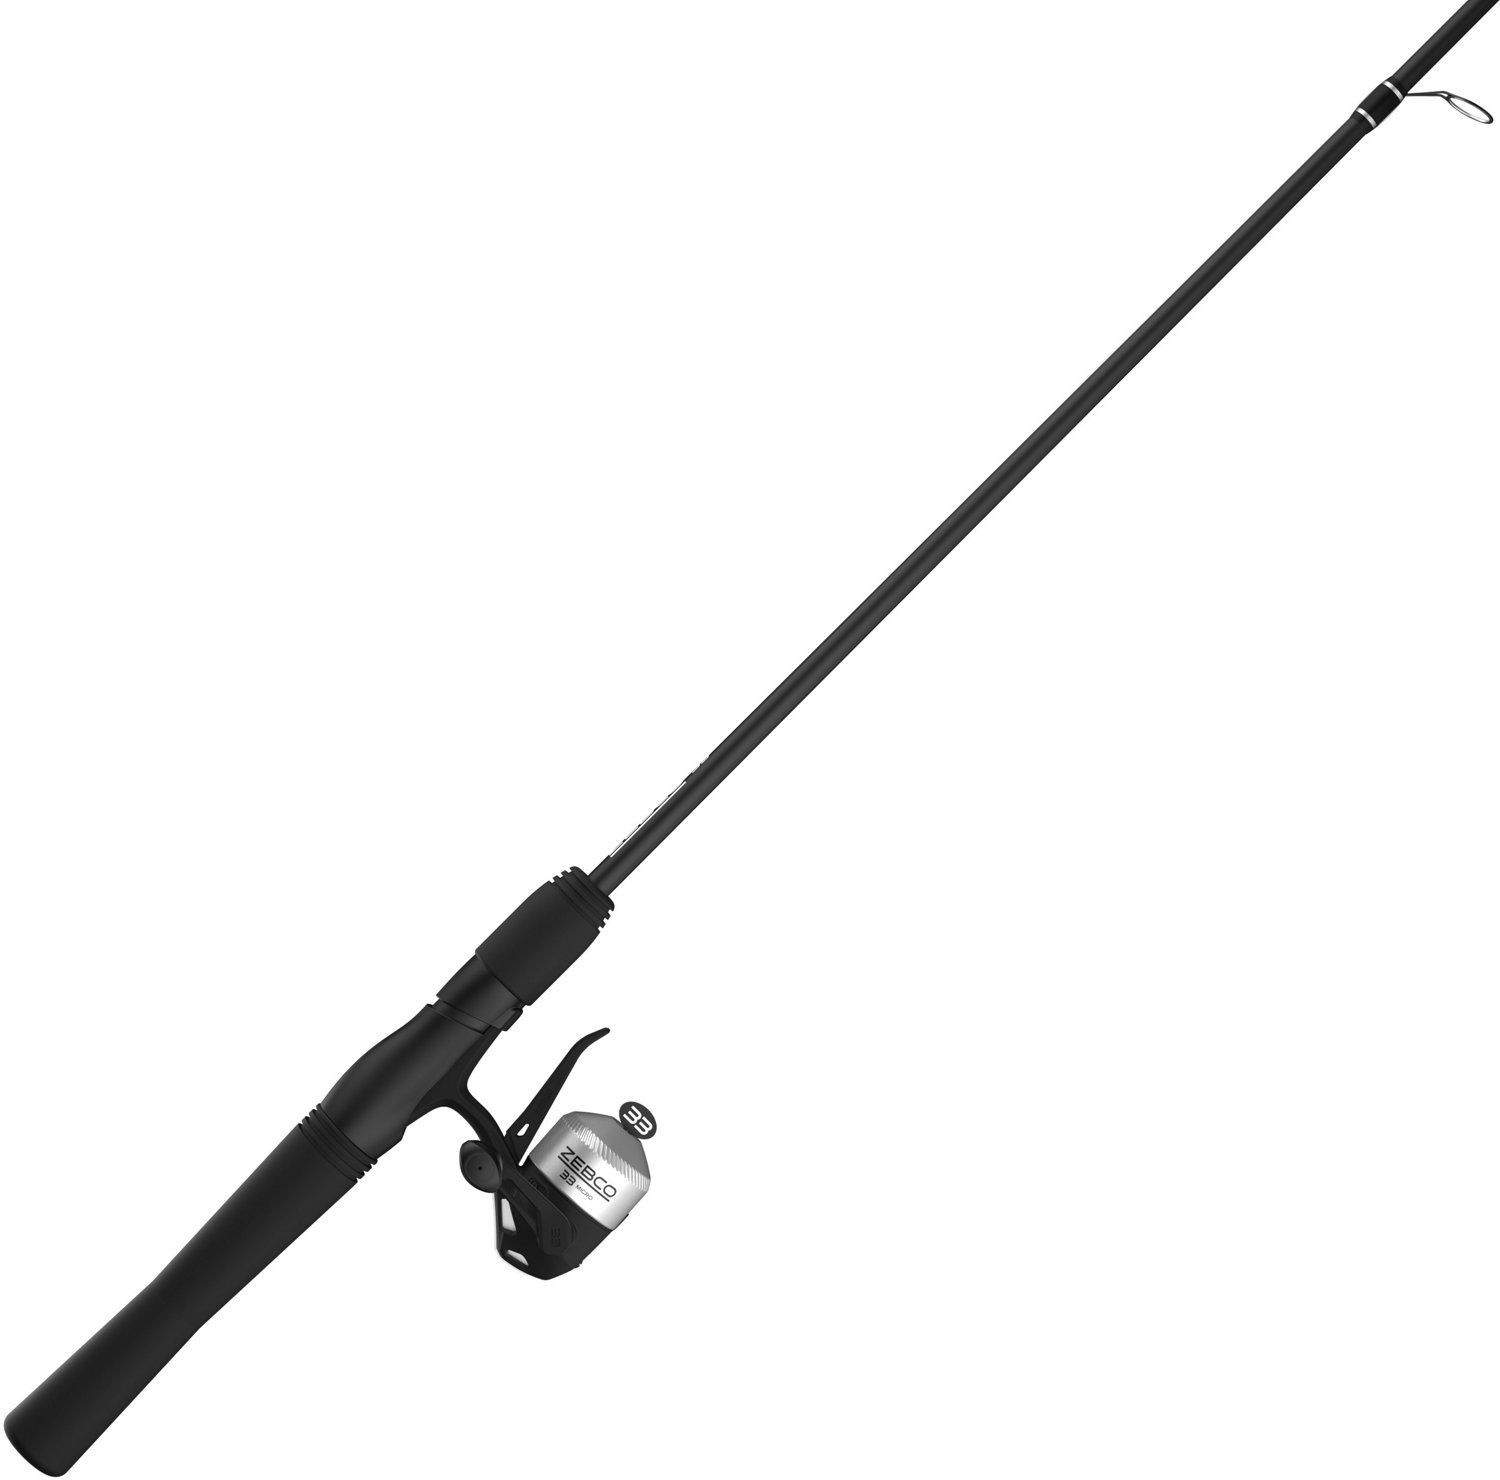 Zebco 33 Micro Trigger 5 ft UL Freshwater Triggerspin Rod and Reel Combo